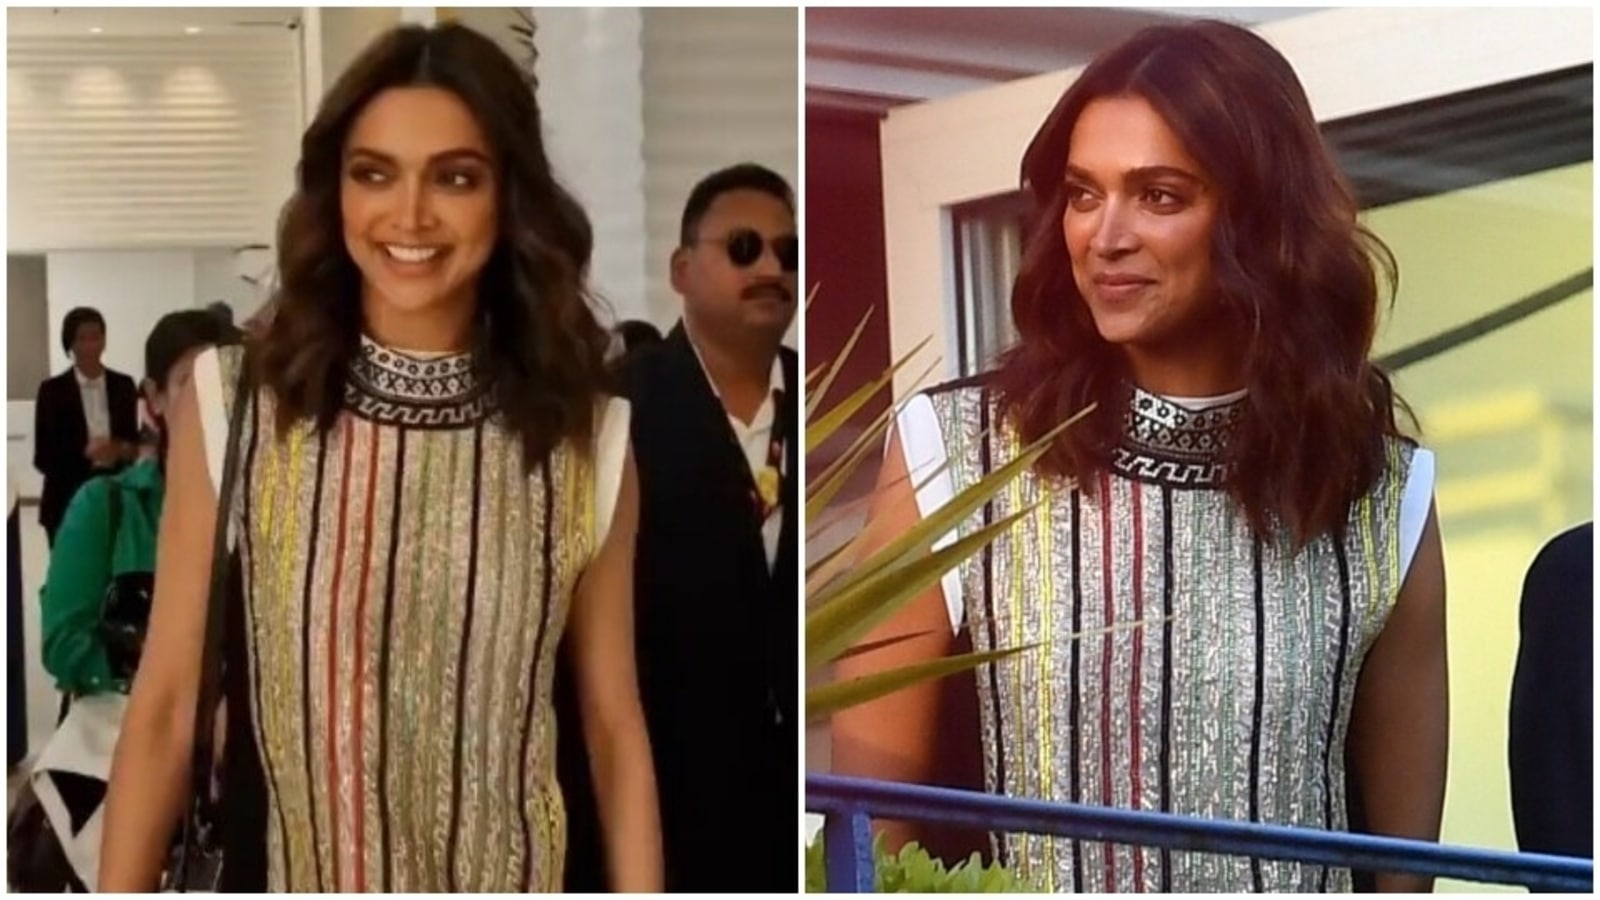 deepika padukone's look for louis vuitton cannes dinner 2022 your  thoughts?! : r/BollyBlindsNGossip